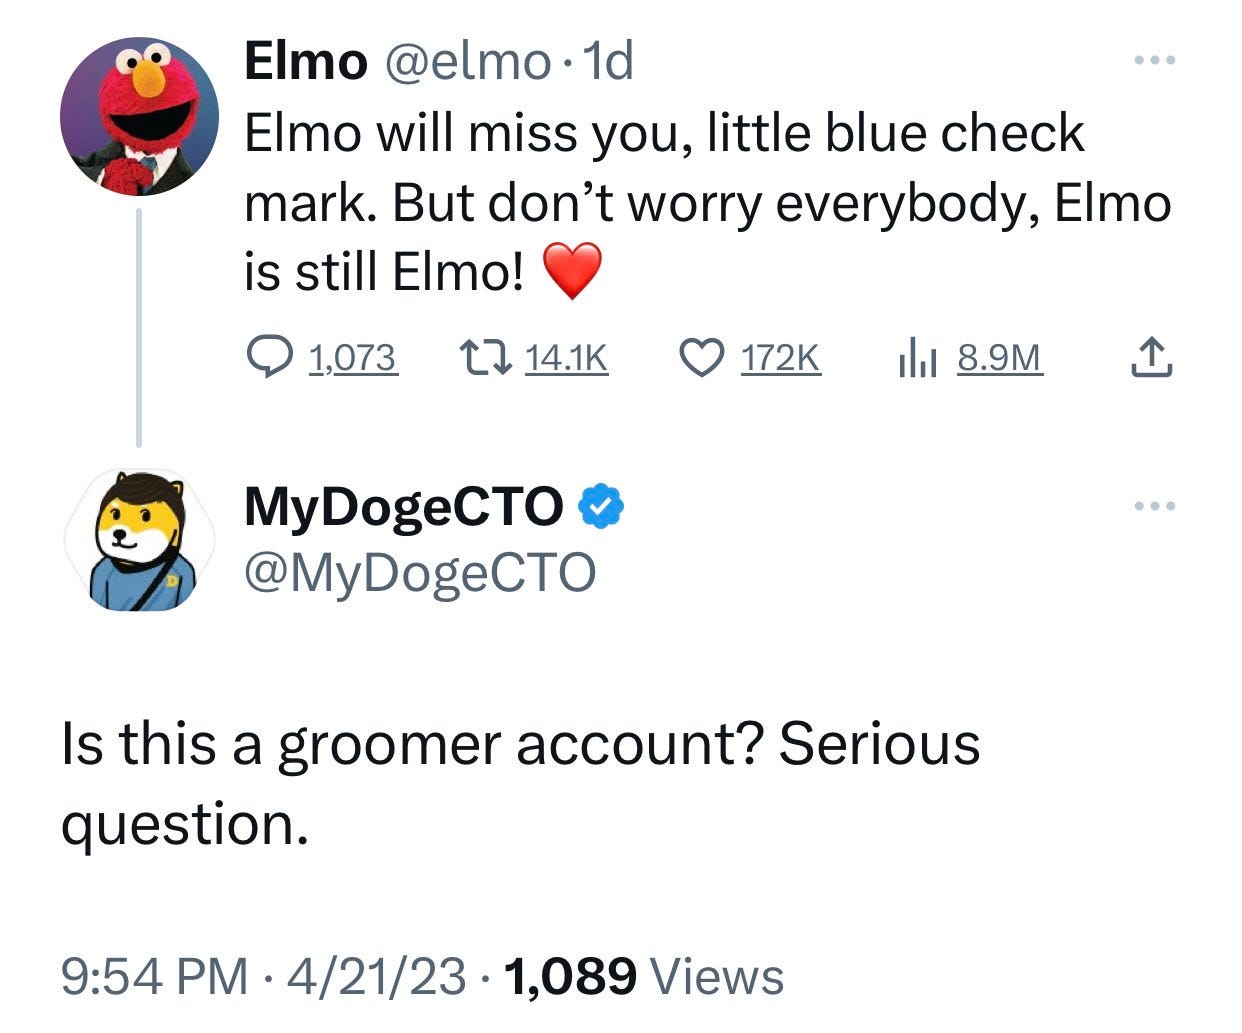 ELMO: Elmo will miss you, little blue check mark. But don’t worry everybody, Elmo is still Elmo!. SOME GUY: are you a pedophile